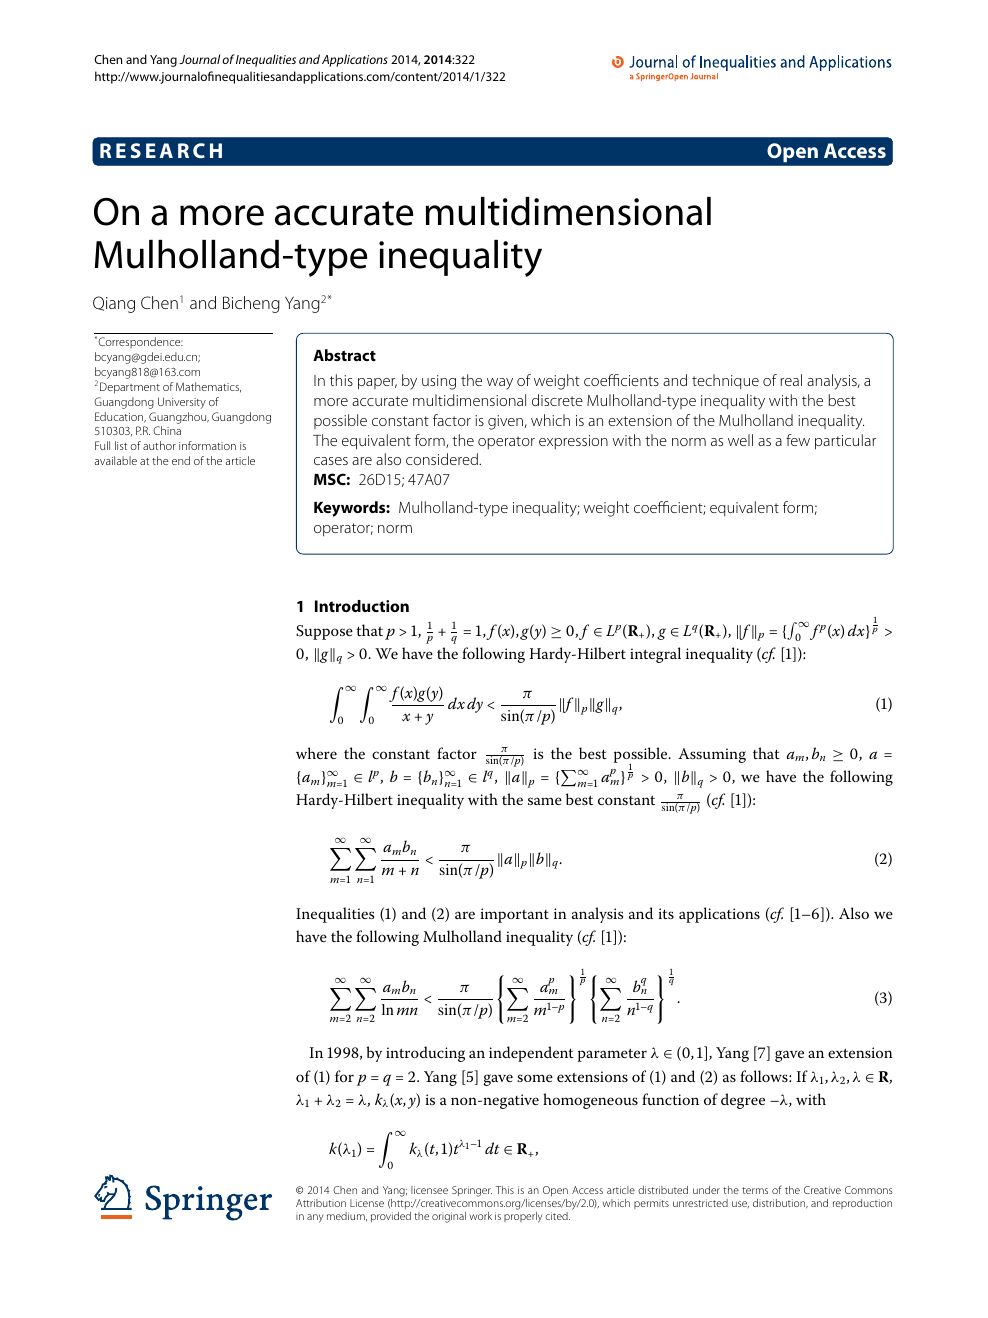 On A More Accurate Multidimensional Mulholland Type Inequality Topic Of Research Paper In Mathematics Download Scholarly Article Pdf And Read For Free On Cyberleninka Open Science Hub